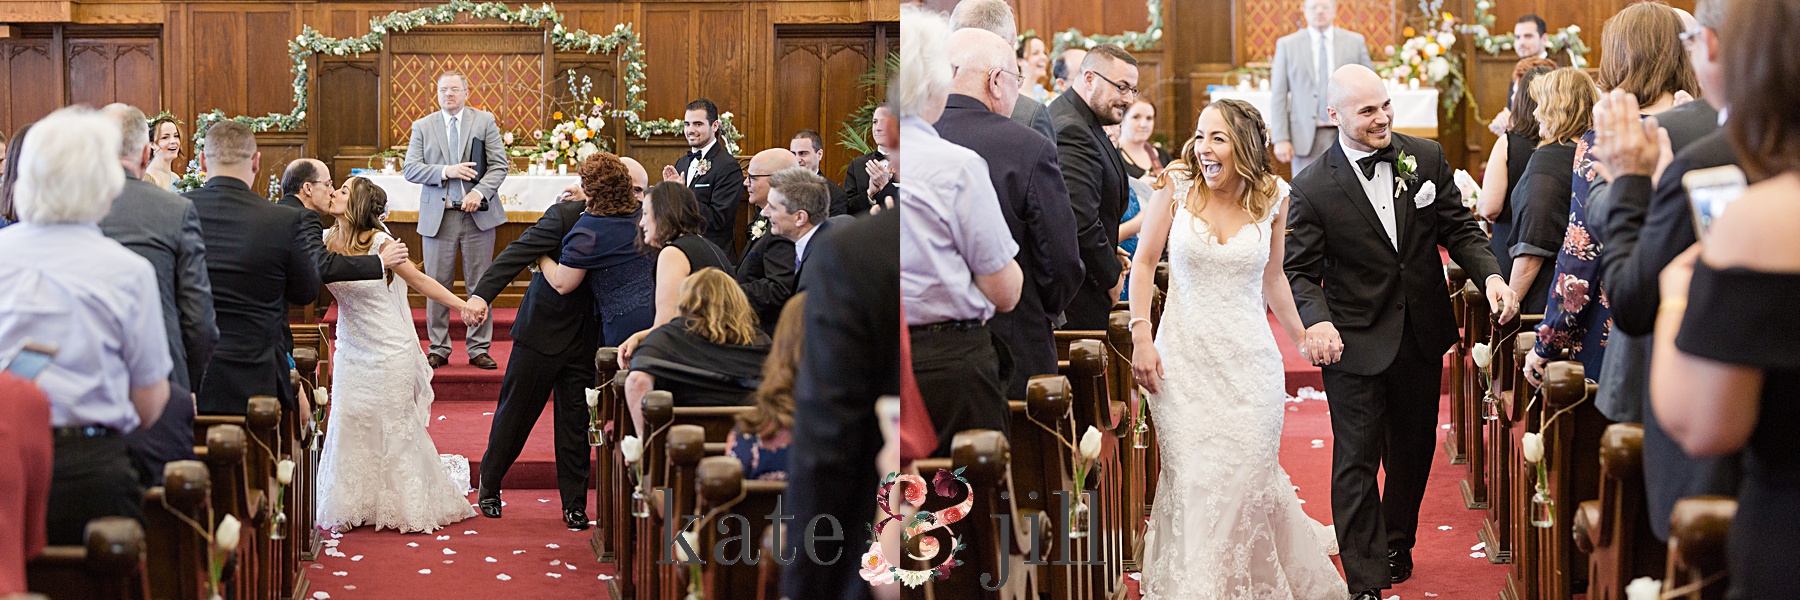 bride and groom recessional woodcrest country club wedding